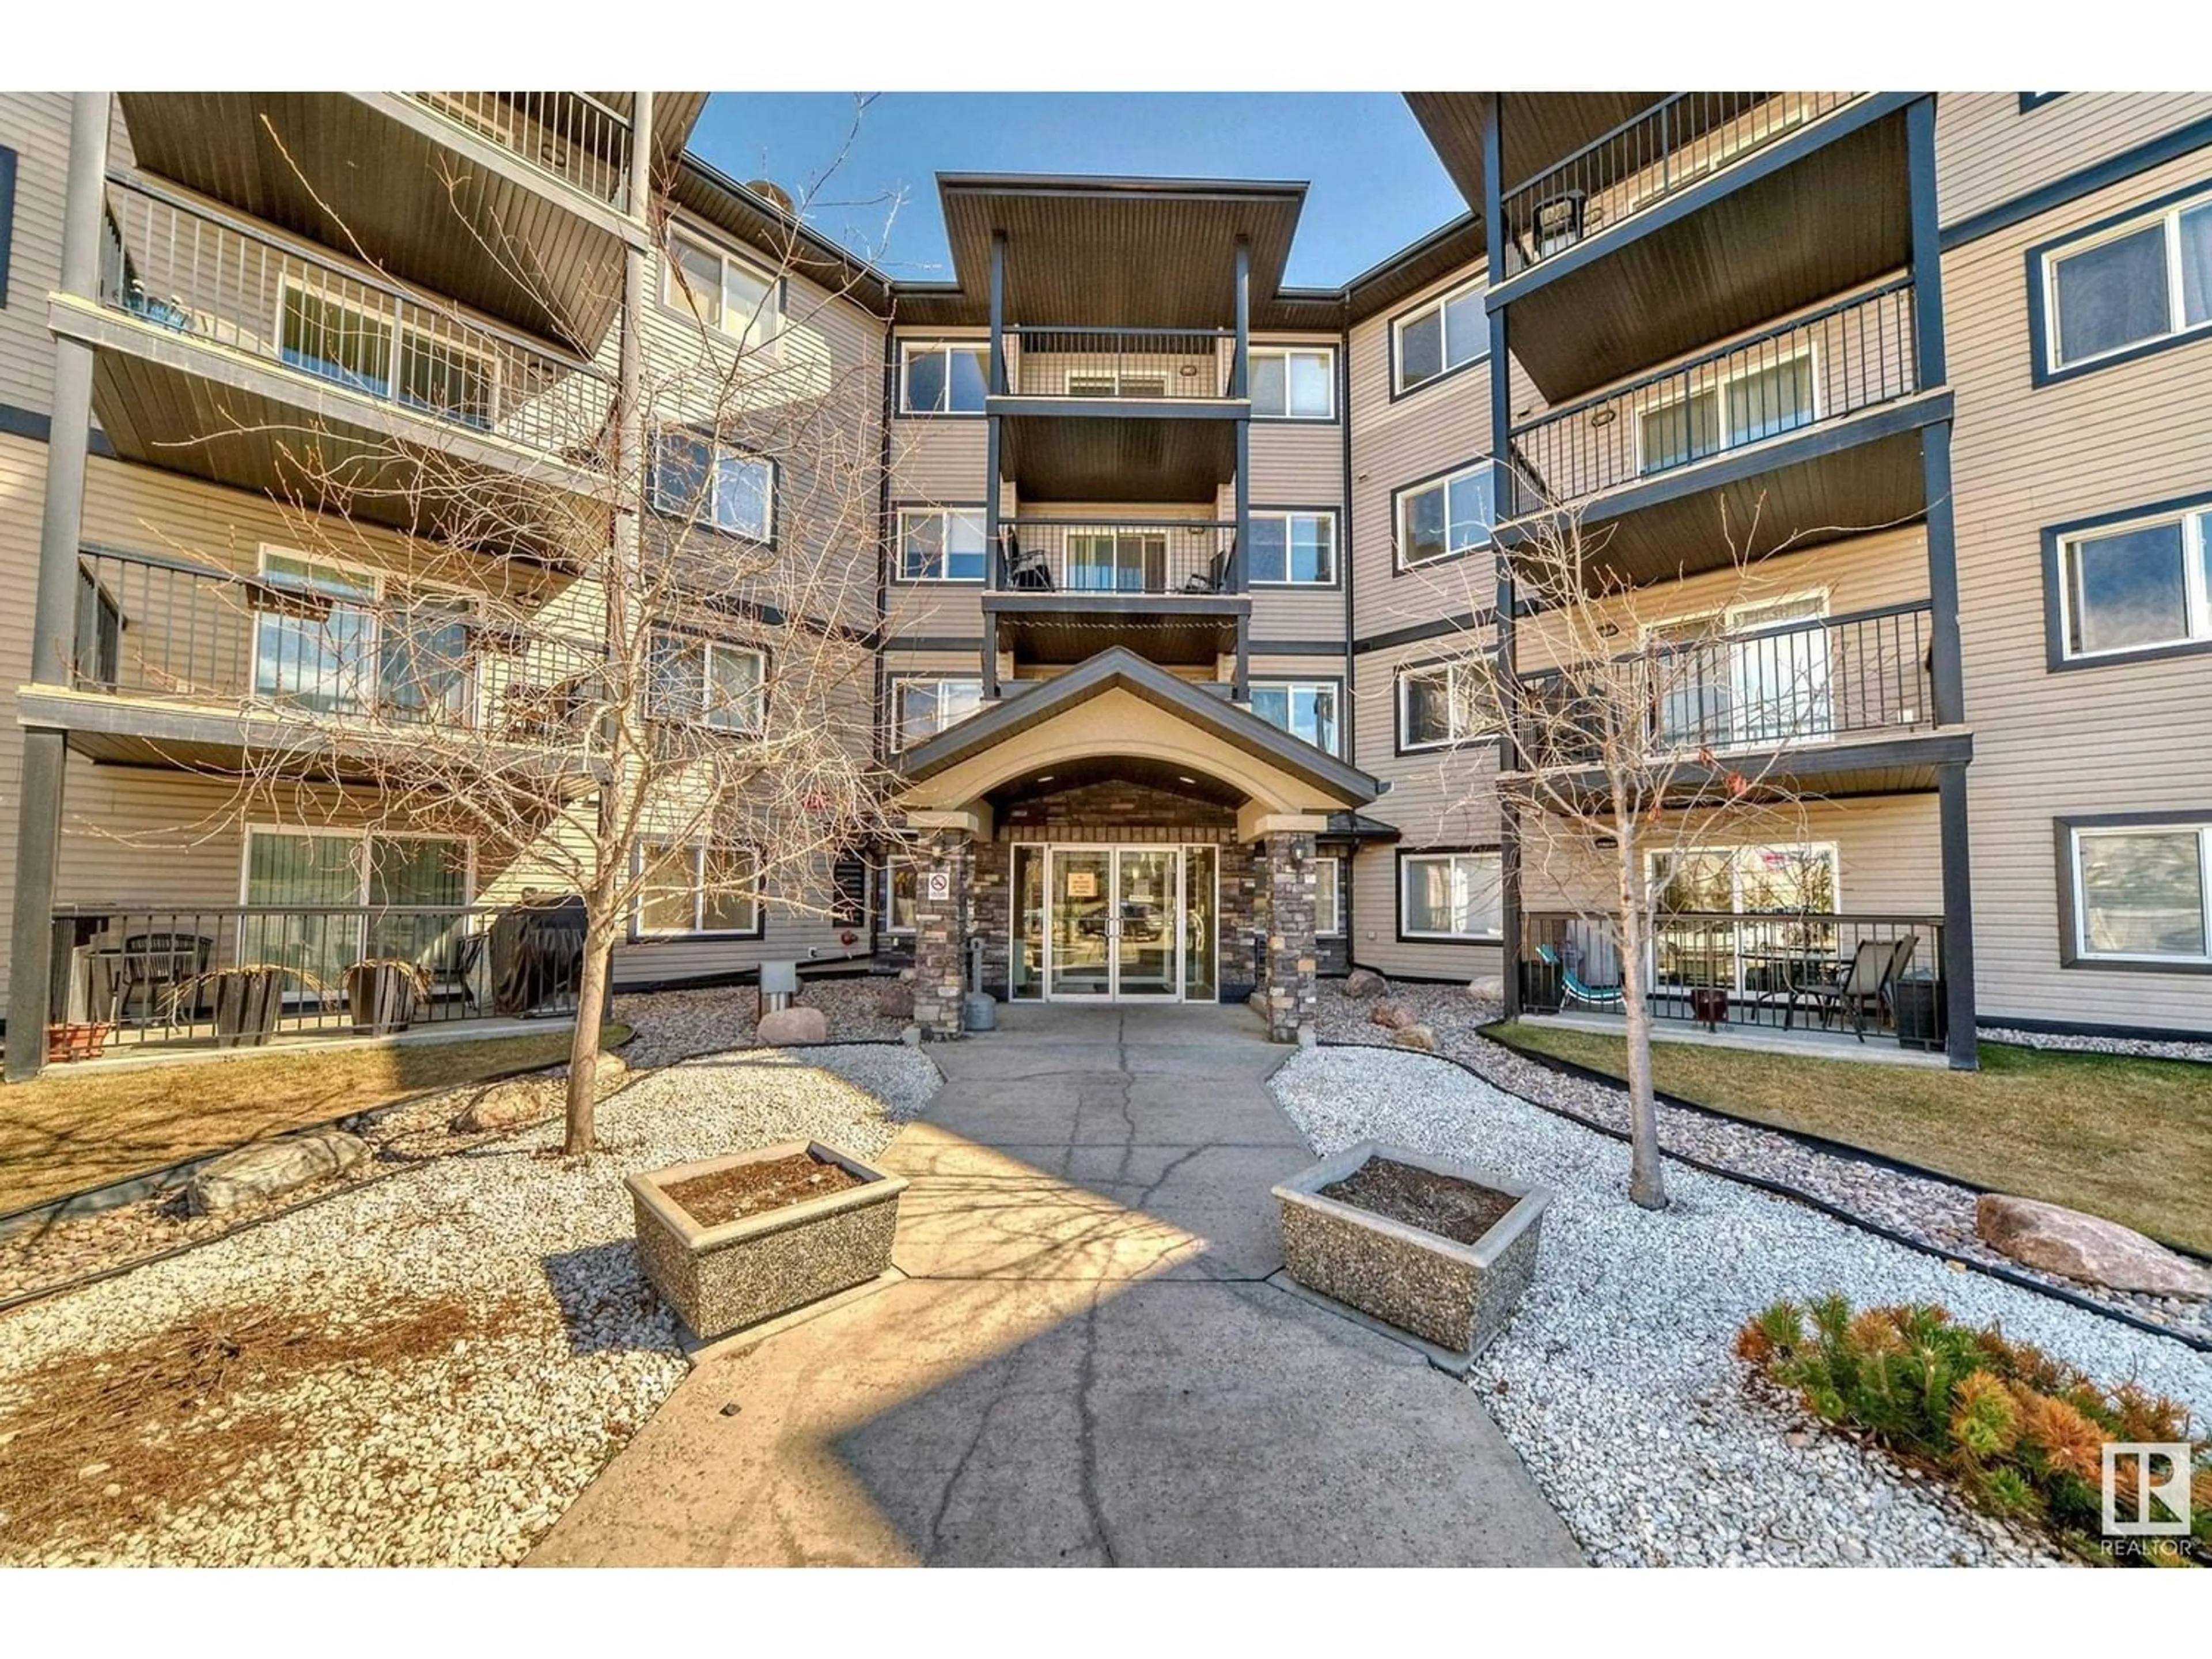 A pic from exterior of the house or condo for #421 5951 165 AV NW, Edmonton Alberta T5Y0J6